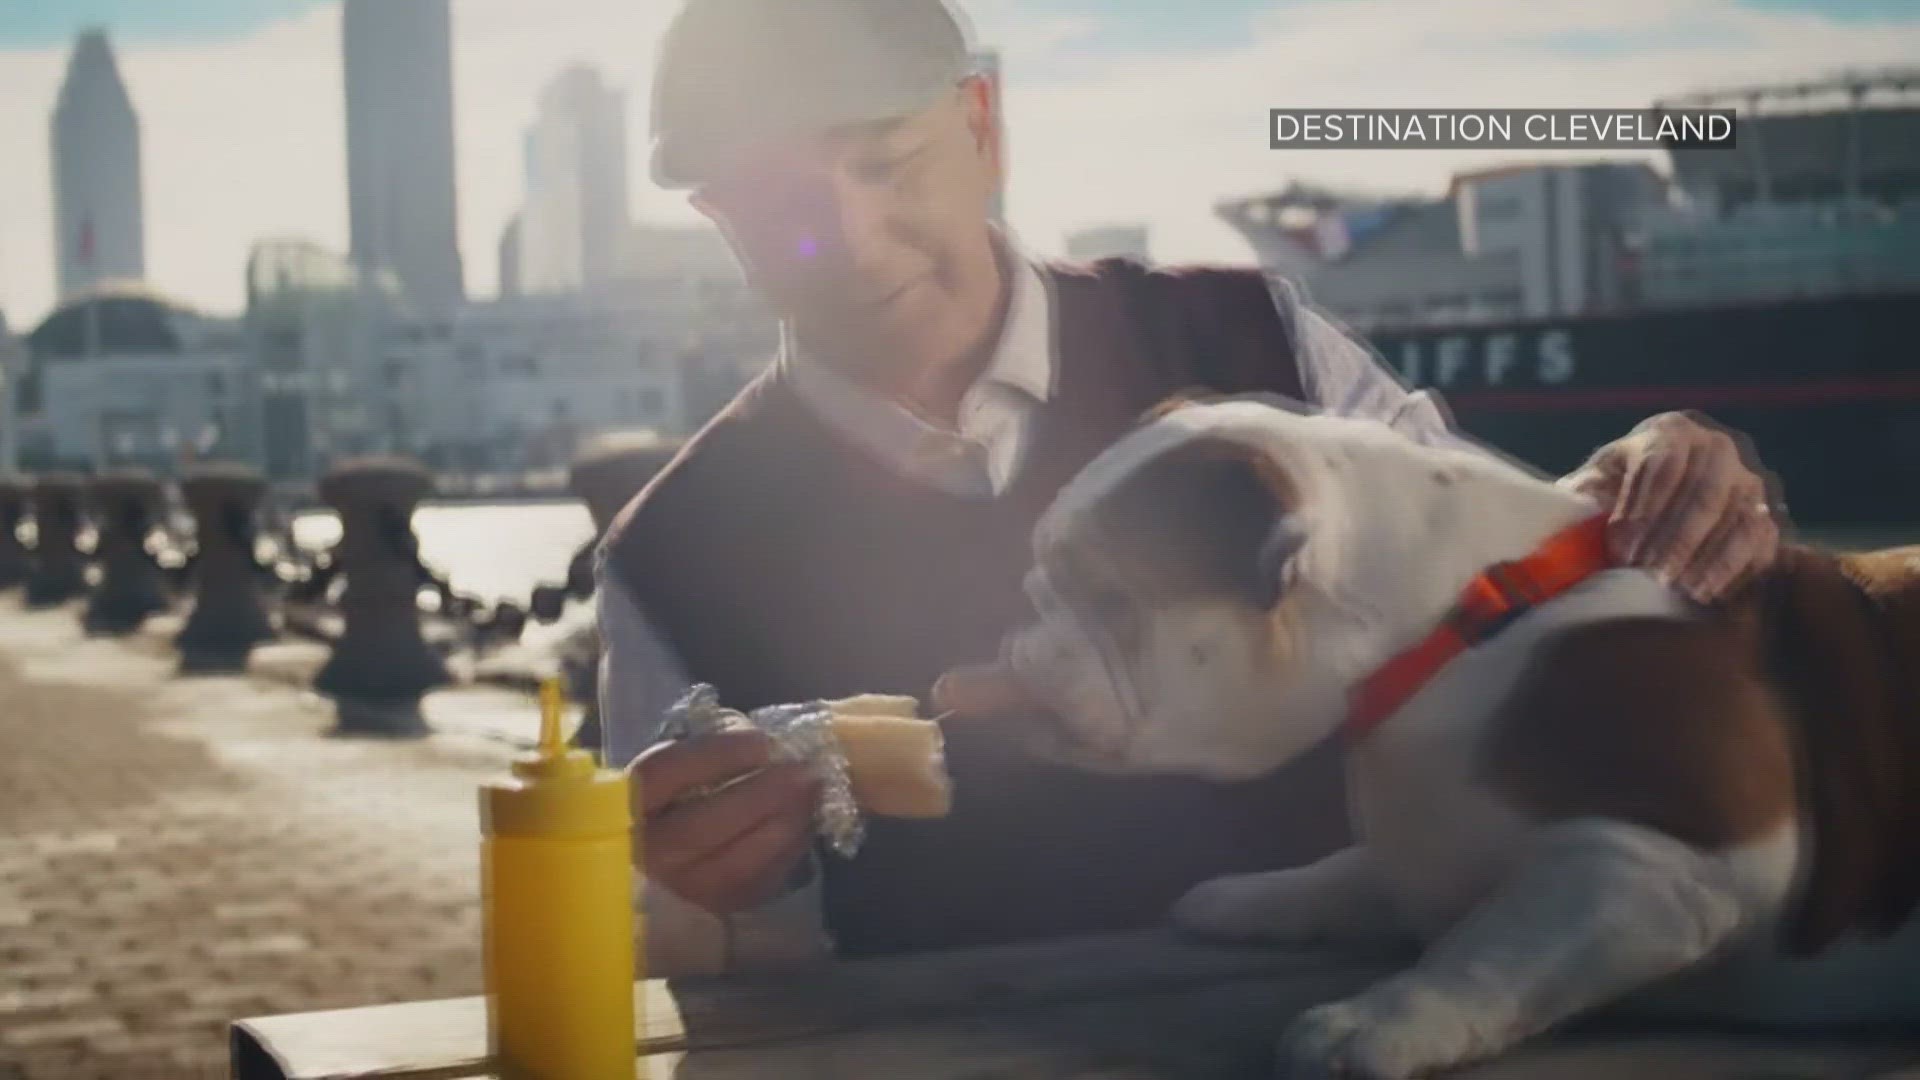 An Animal Planet ad featuring Cleveland puts the city in the national spotlight!